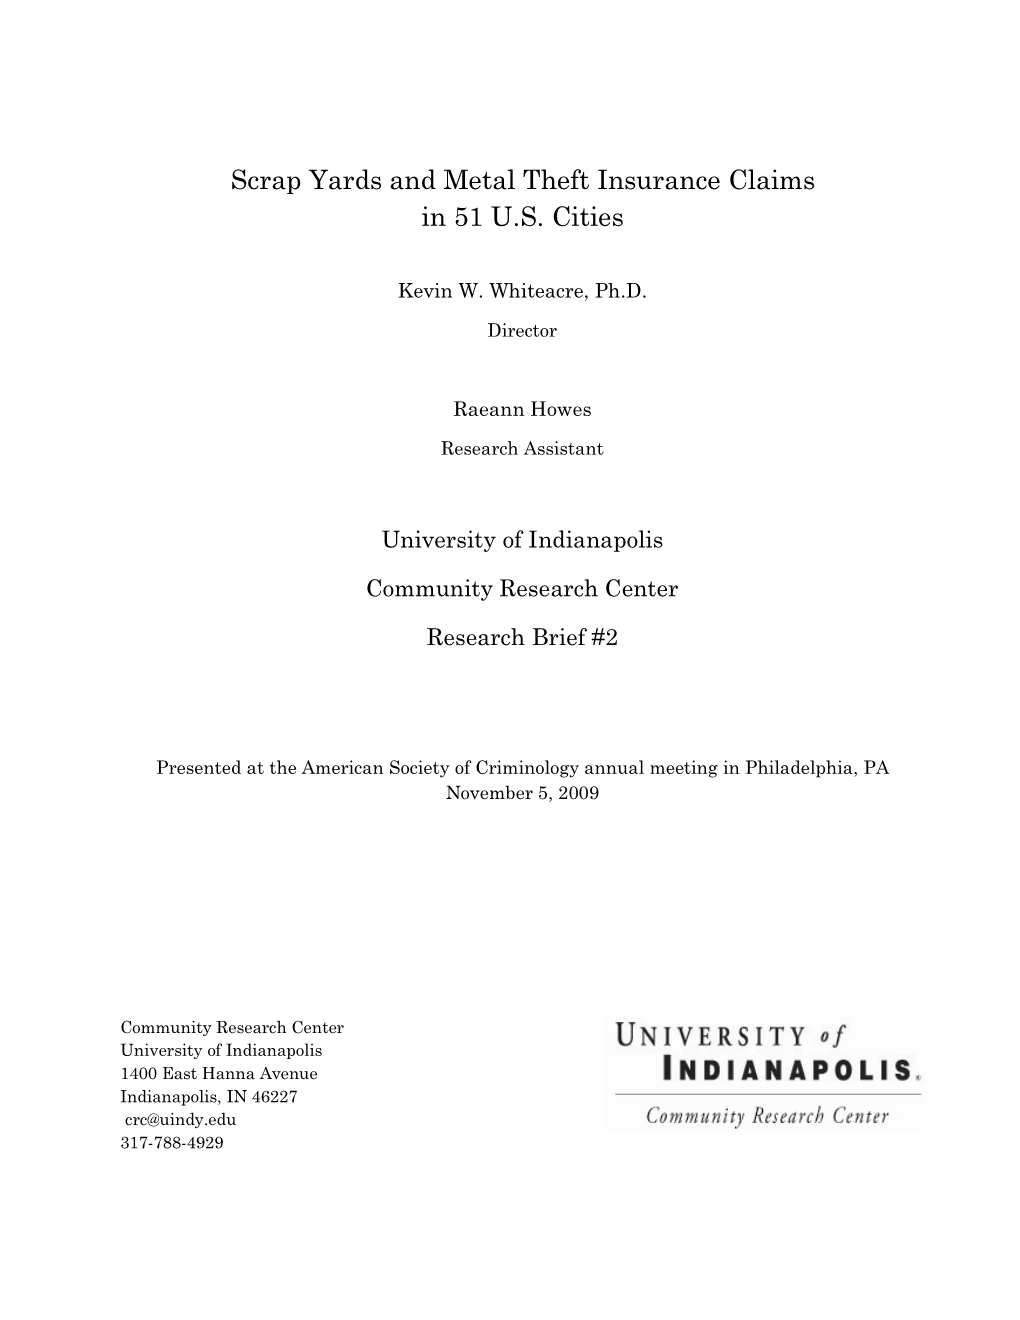 Scrap Yards and Metal Theft Insurance Claims in 51 U.S. Cities